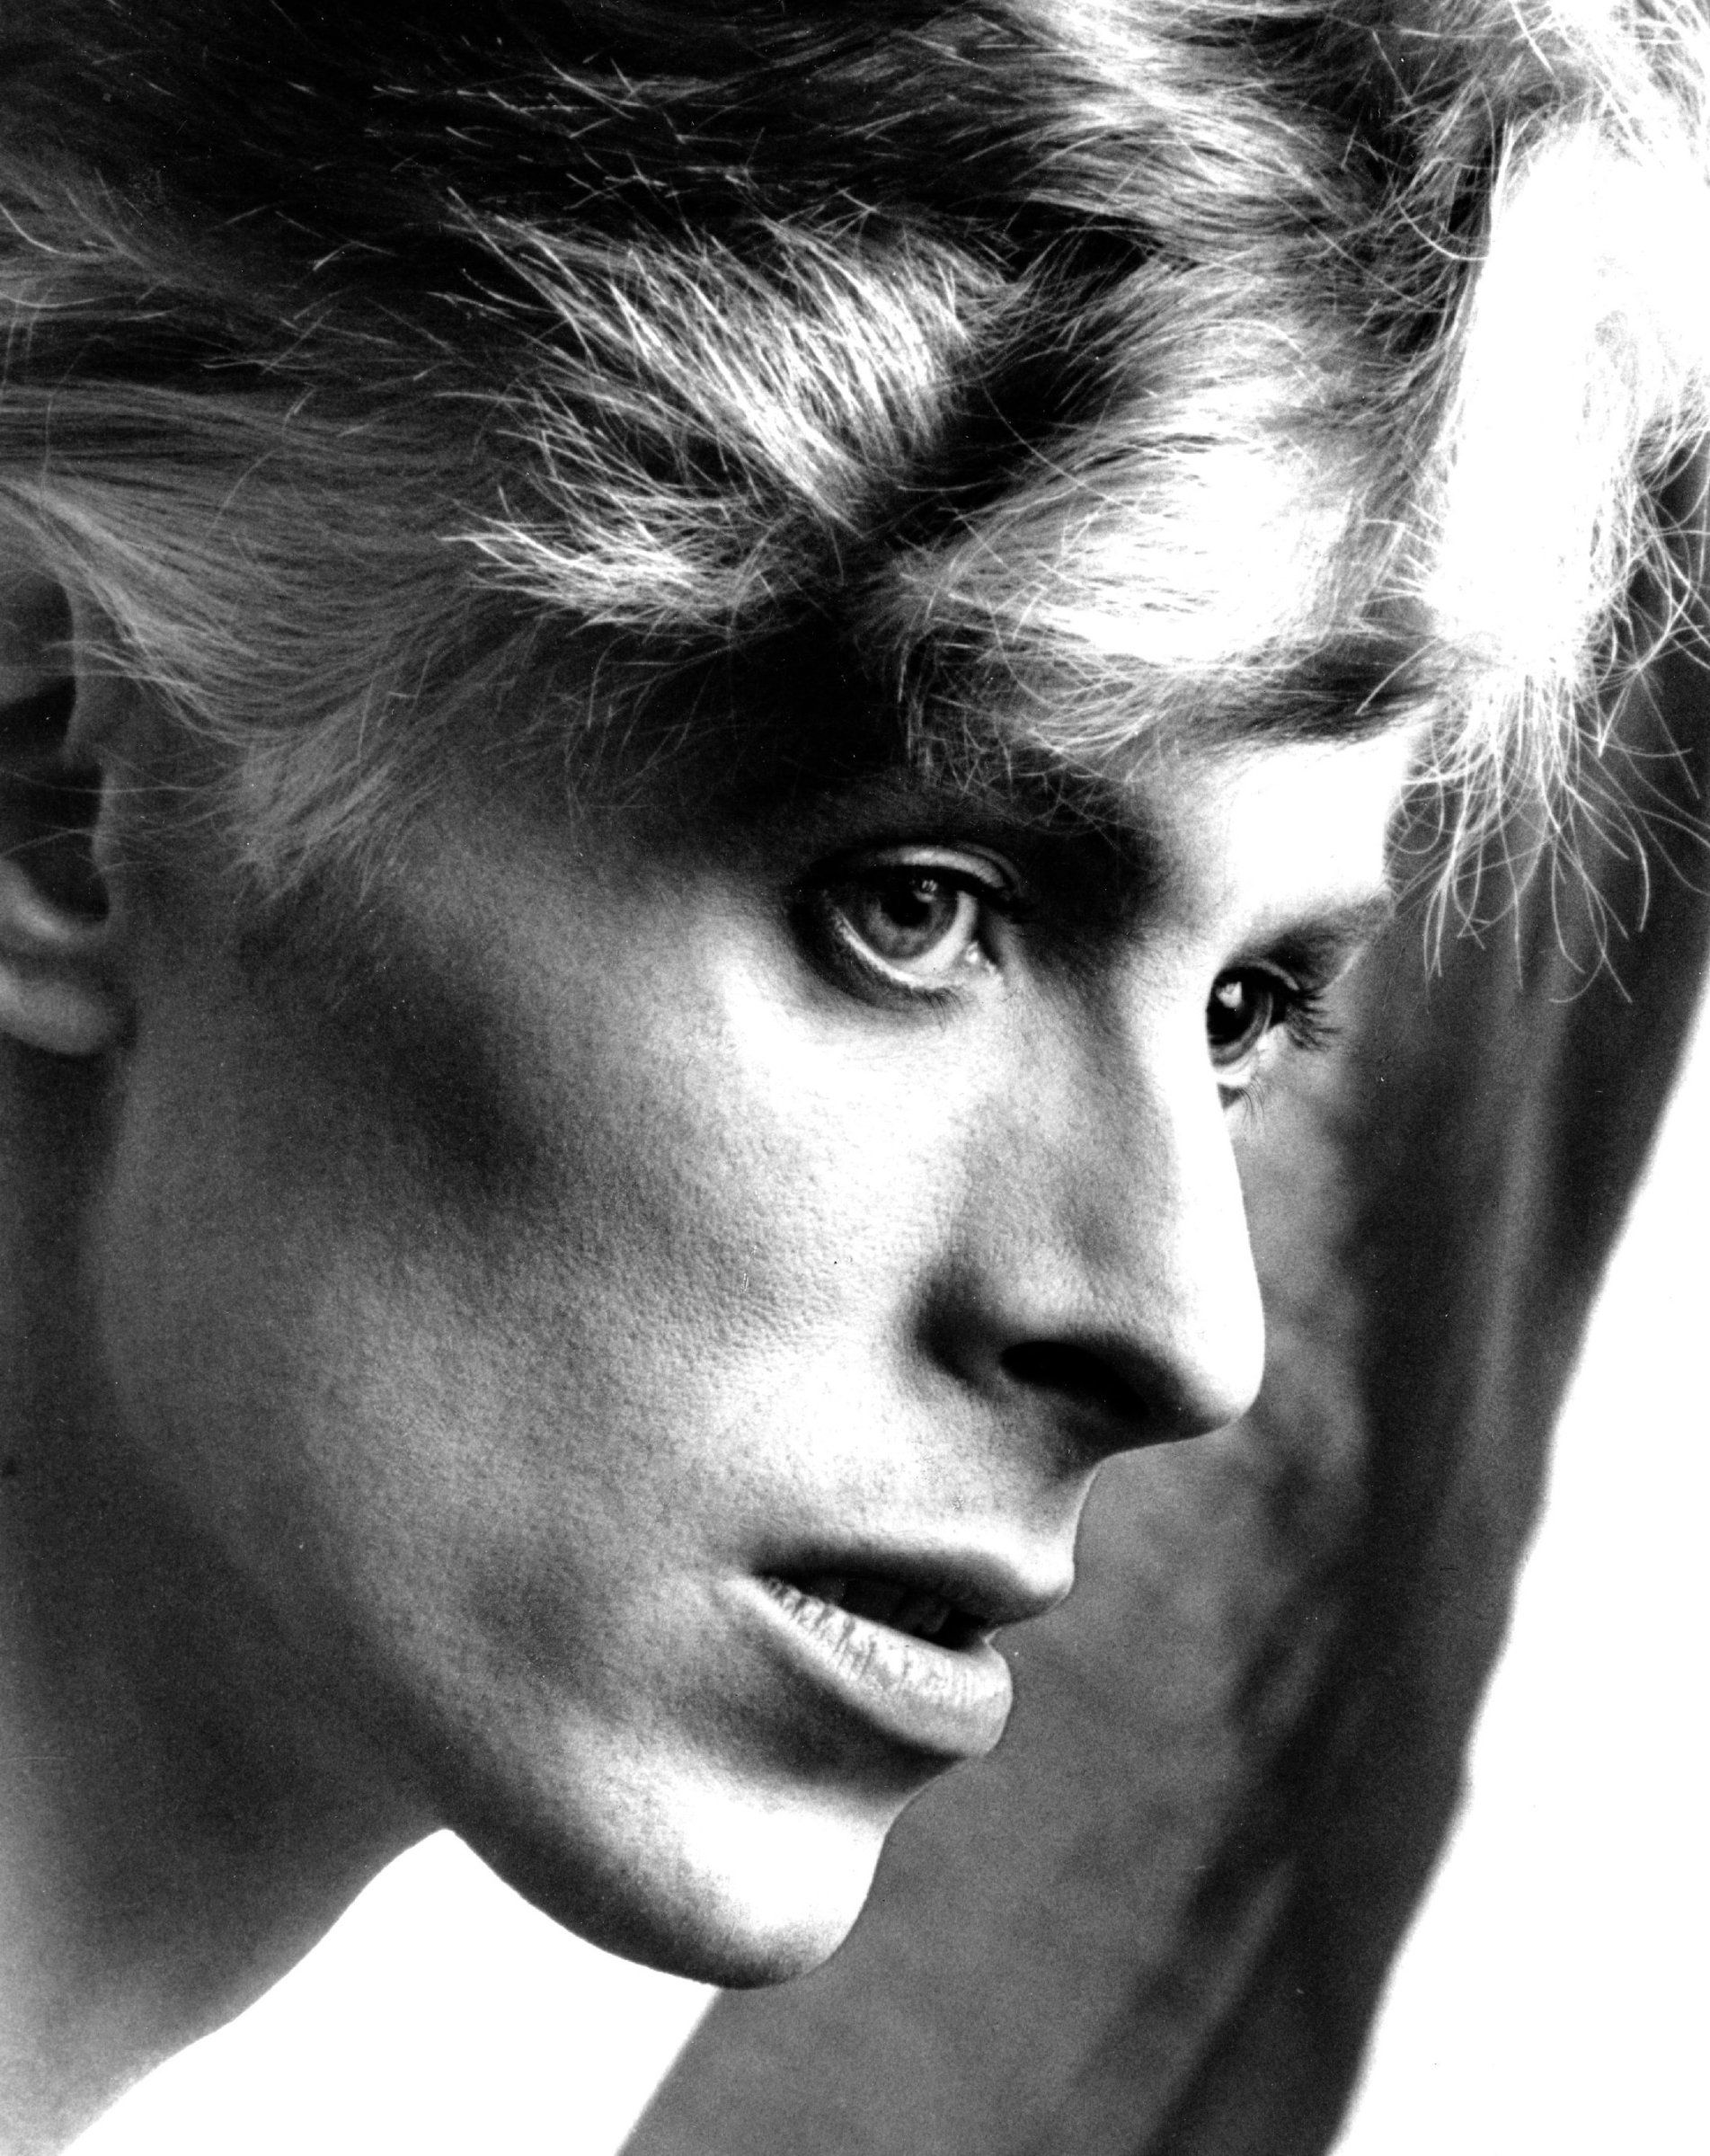 DAVID BOWIE I 1976, FOTO: MICHAEL OCHS ARCHIVES/GETTY IMAGES